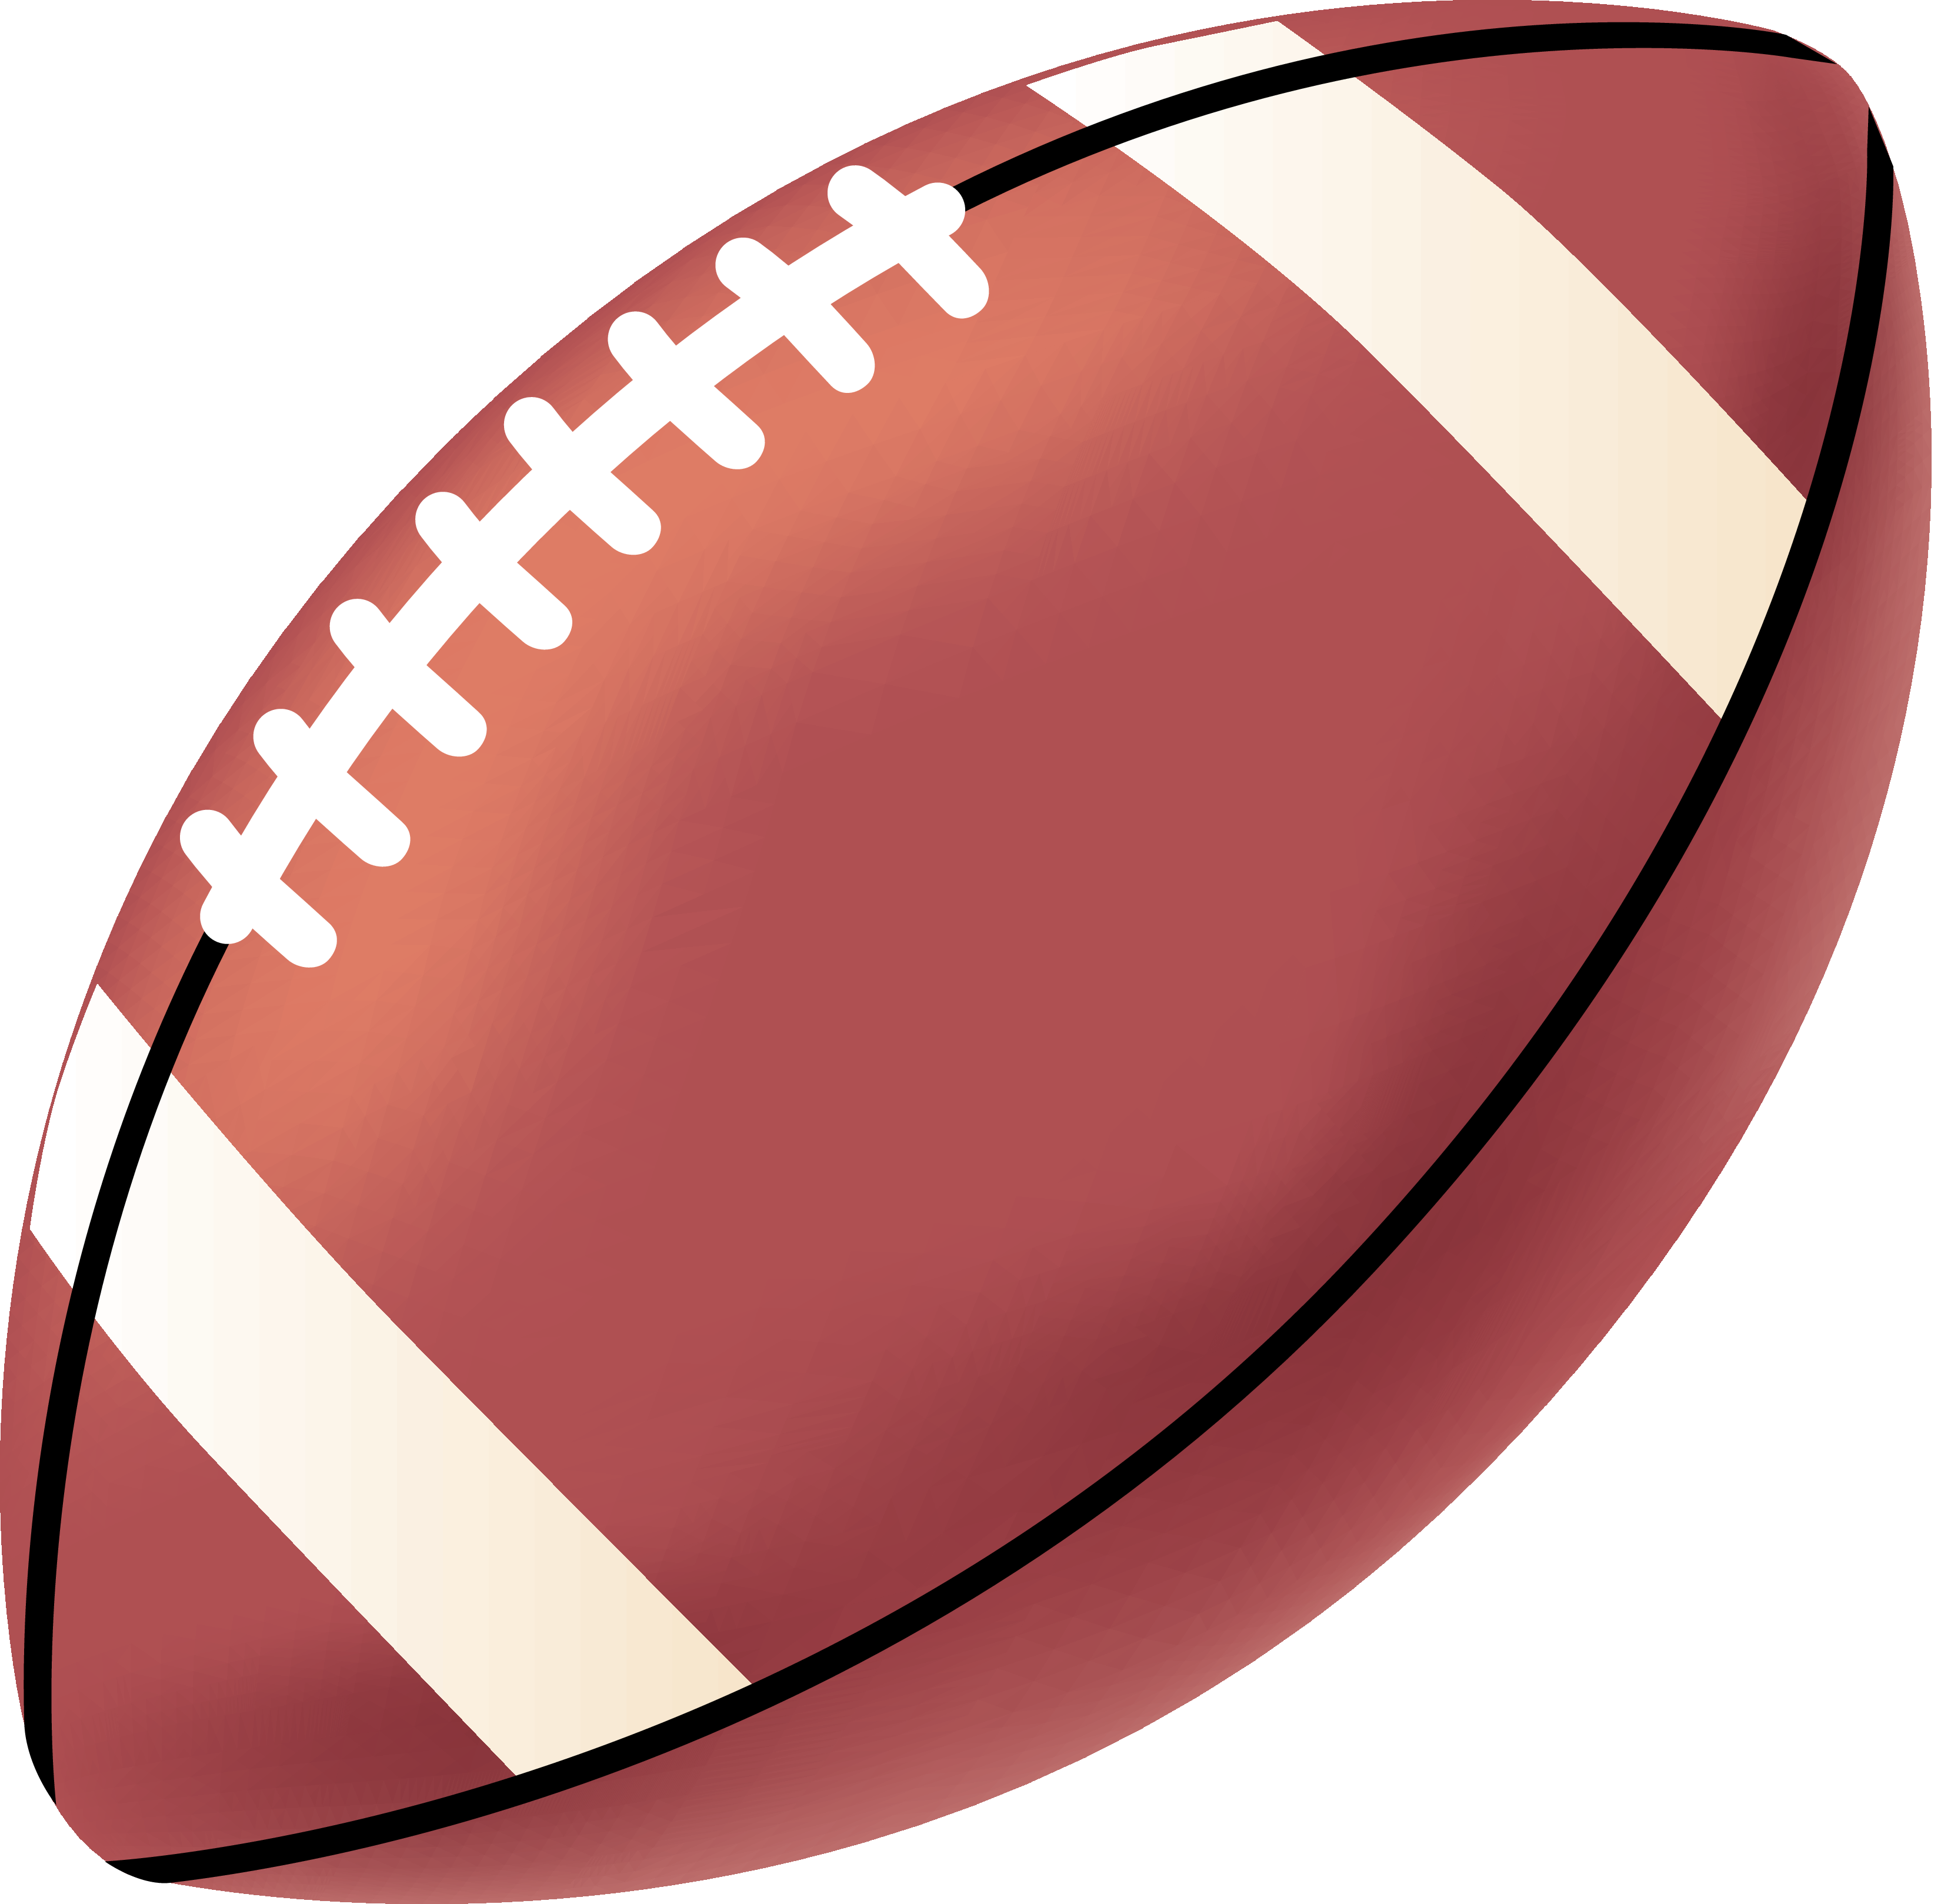 For - Clip Art Football. | Clipart Panda - Free Clipart Images